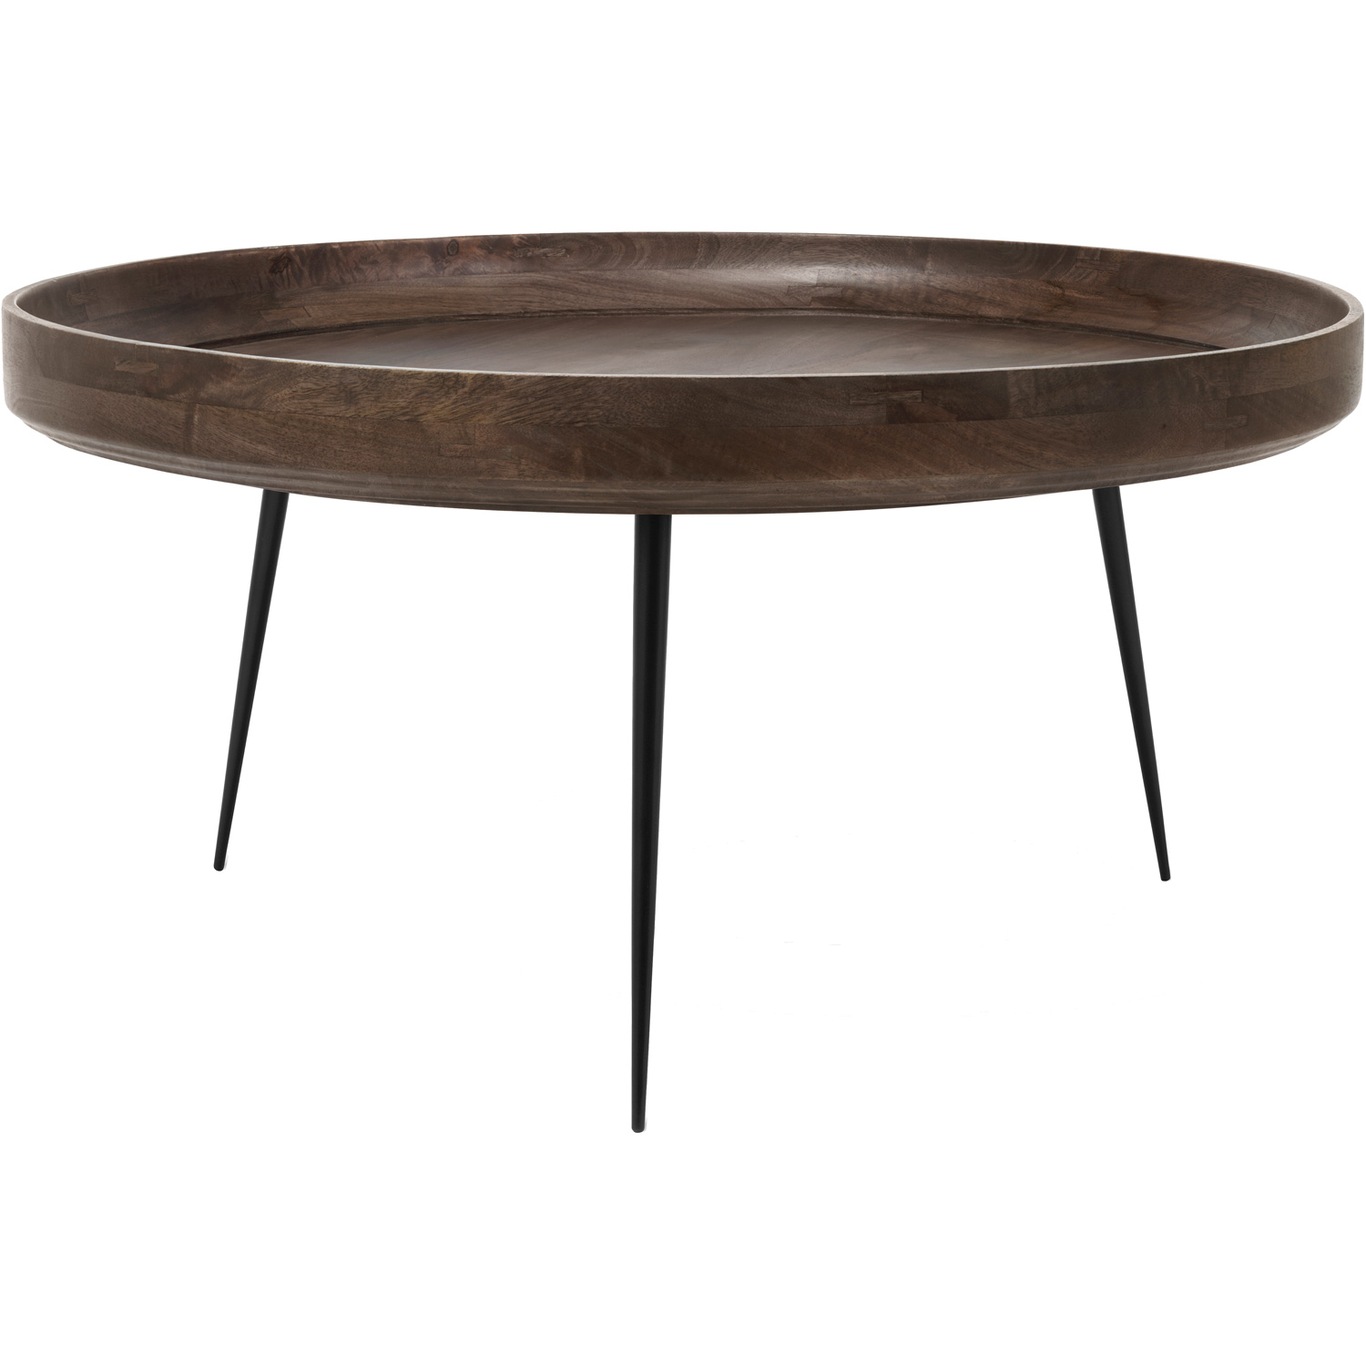 Bowl Coffee Table, Sirka Grey Stained Mango Wood, 75 cm